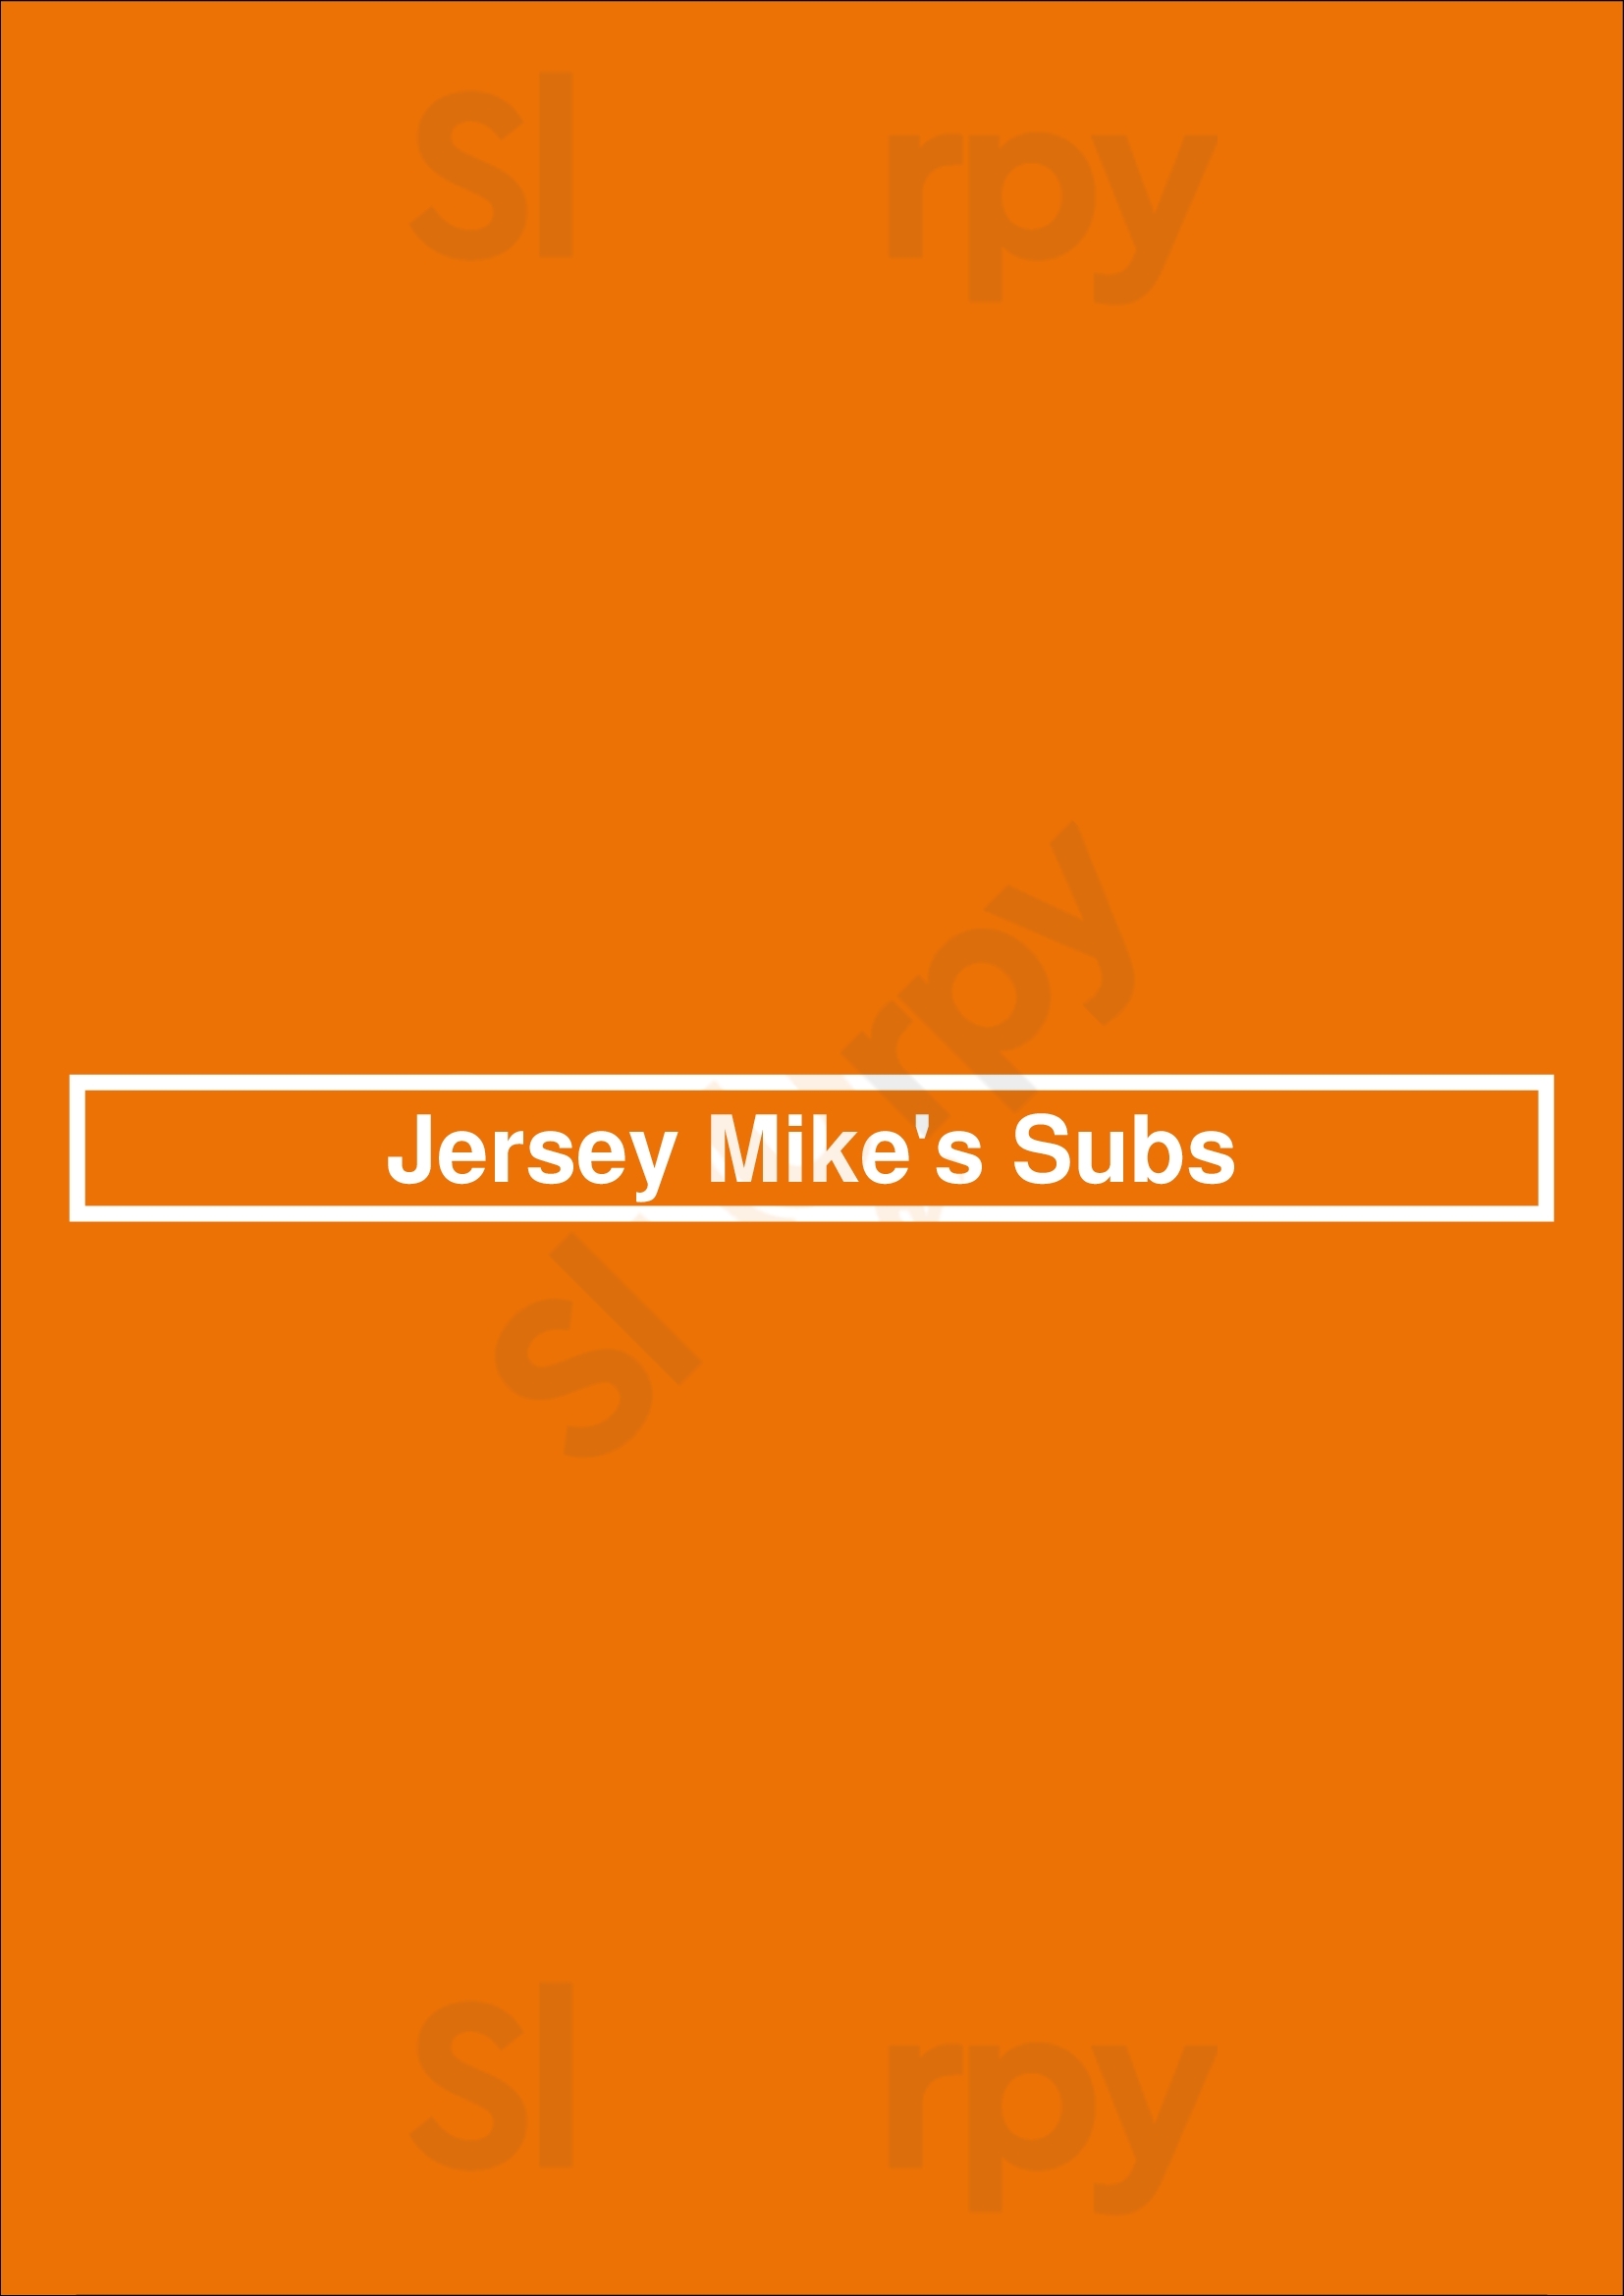 Jersey Mike's Subs Knoxville Menu - 1